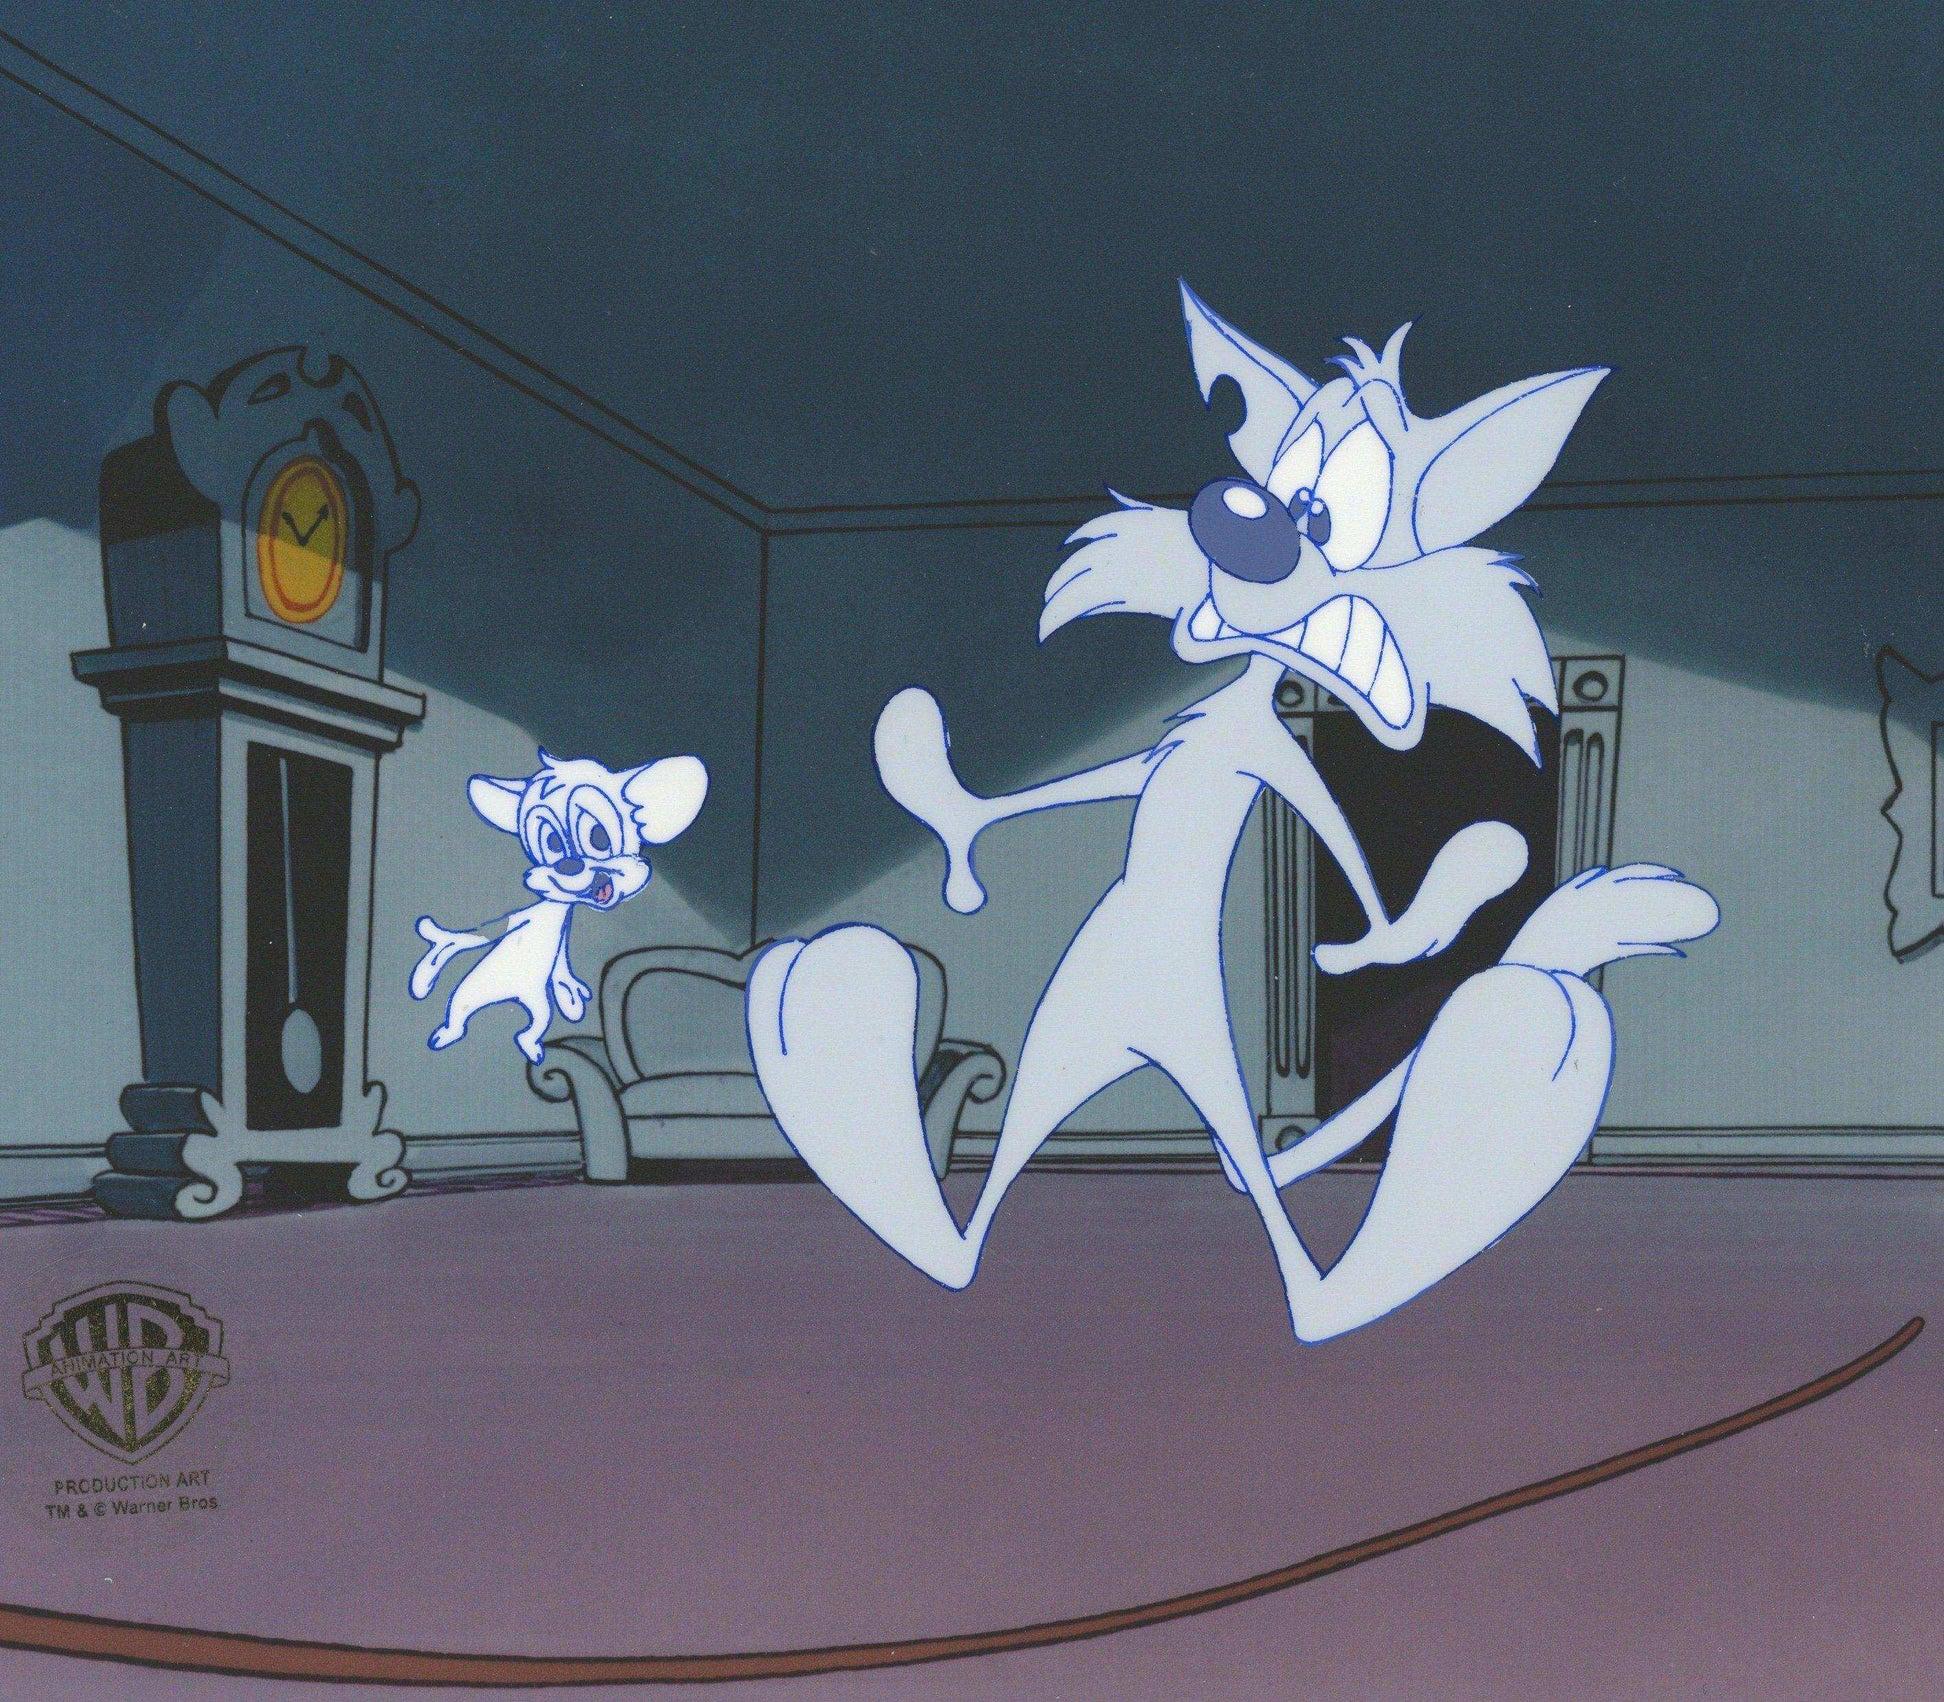 Tiny Toons Original Production Cel with Matching Drawing: Furball and Sneezer - Art by Warner Bros. Studio Artists